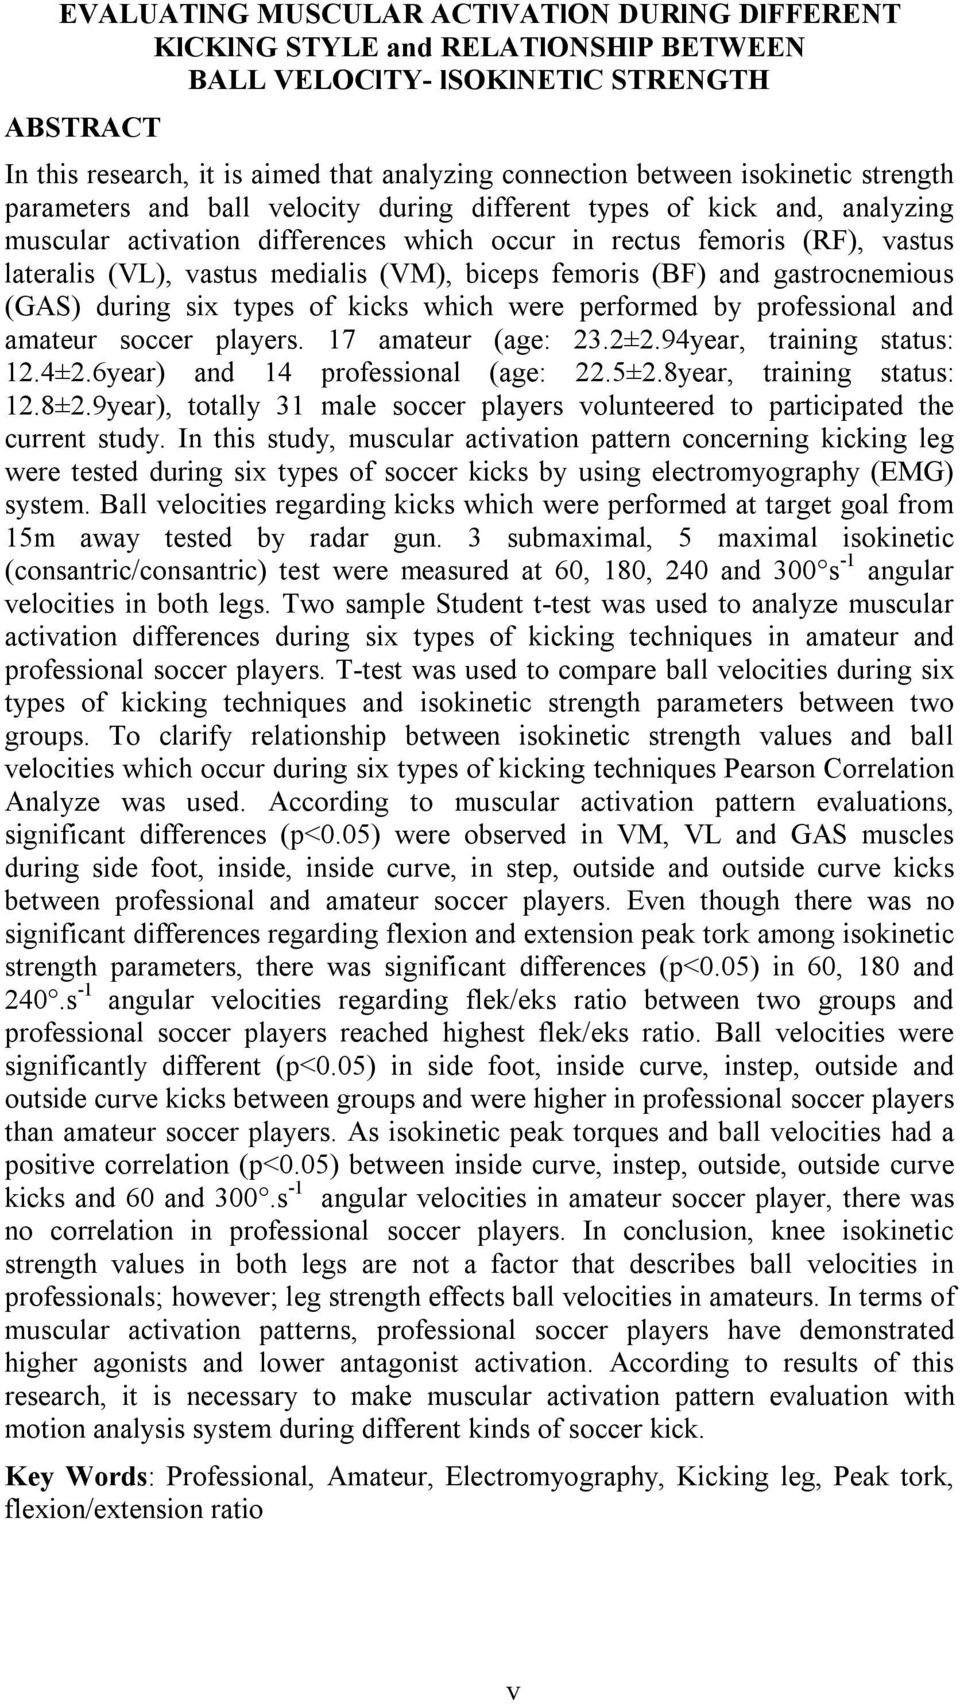 medialis (VM), biceps femoris (BF) and gastrocnemious (GAS) during six types of kicks which were performed by professional and amateur soccer players. 17 amateur (age: 23.2±2.